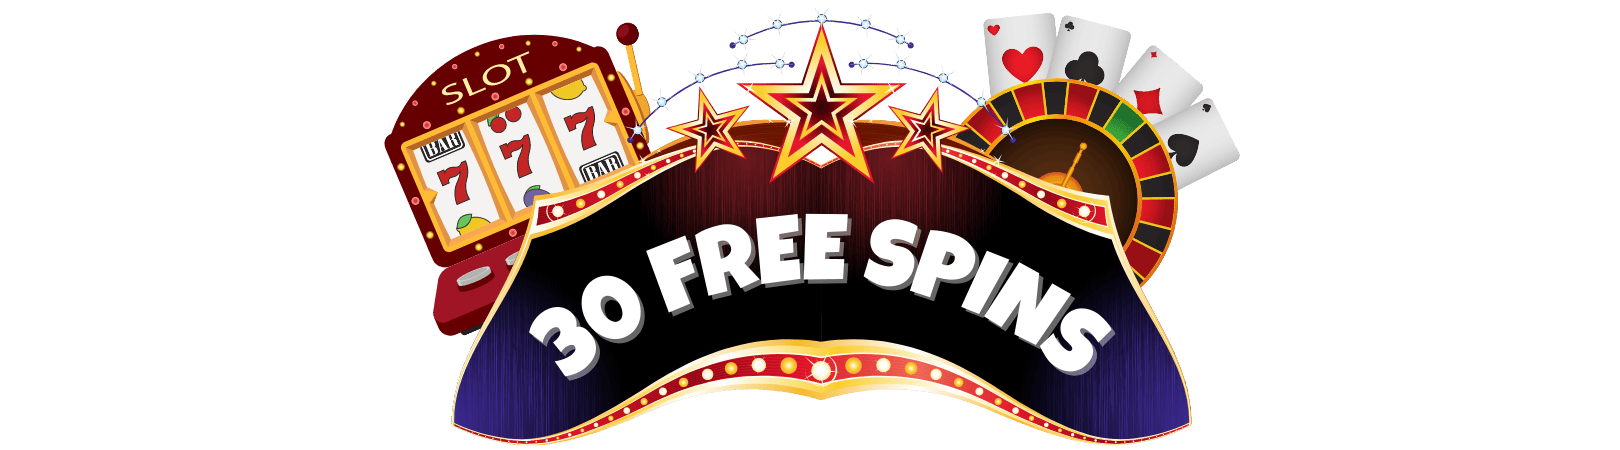 what is 30 free spins img